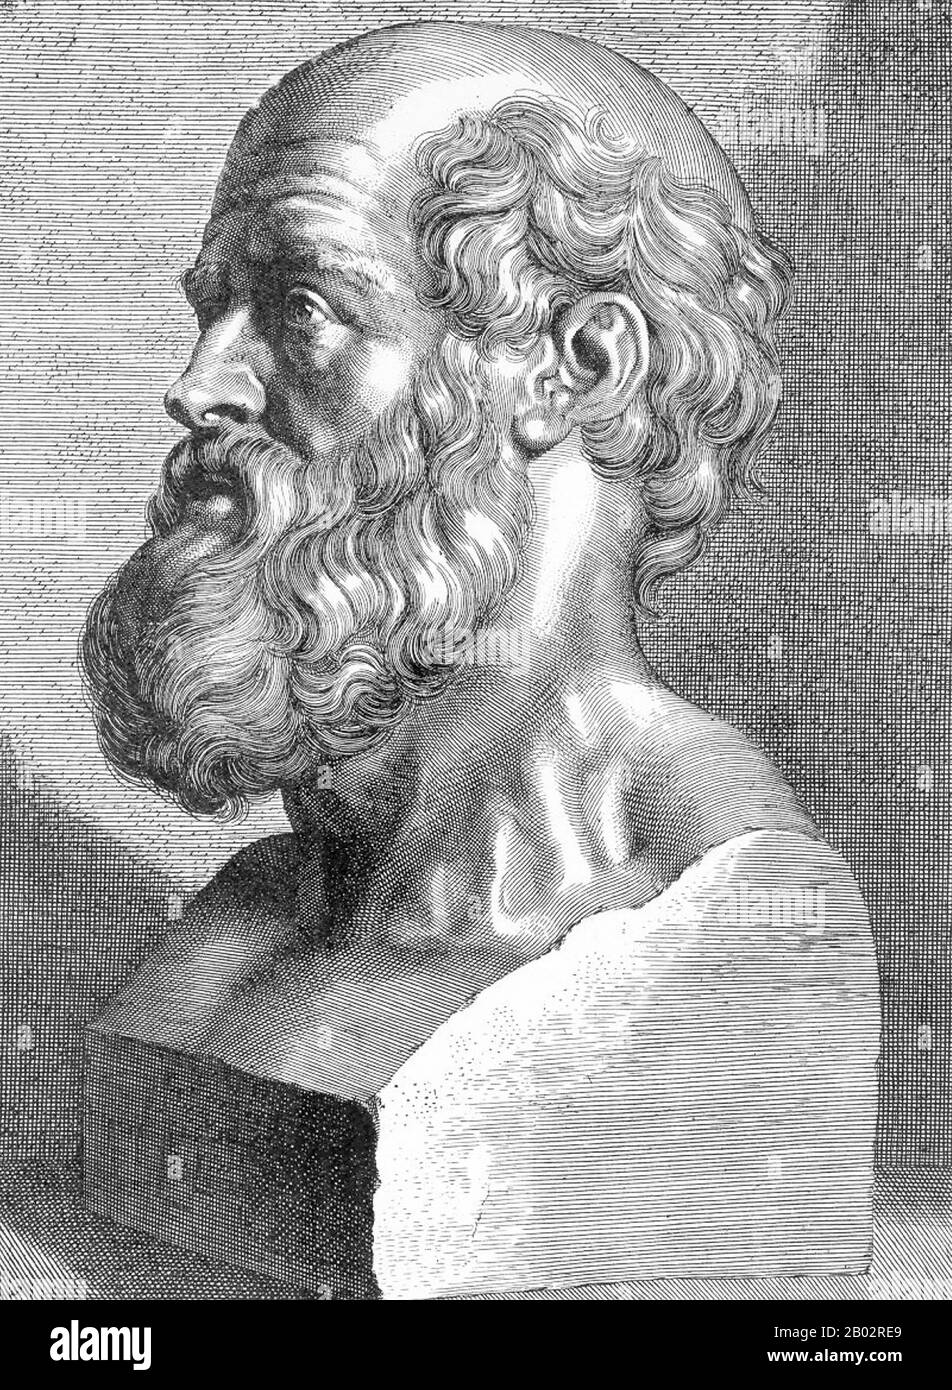 Hippocrates of Kos ( c. 460 – c. 370 BCE), was a Greek physician of the Age of Pericles (Classical Greece), and is considered one of the most outstanding figures in the history of medicine. He is referred to as the 'Father of Western Medicine' in recognition of his lasting contributions to the field as the founder of the Hippocratic School of Medicine.  This intellectual school revolutionized medicine in ancient Greece, establishing it as a discipline distinct from other fields with which it had traditionally been associated (theurgy and philosophy), thus establishing medicine as a profession. Stock Photo